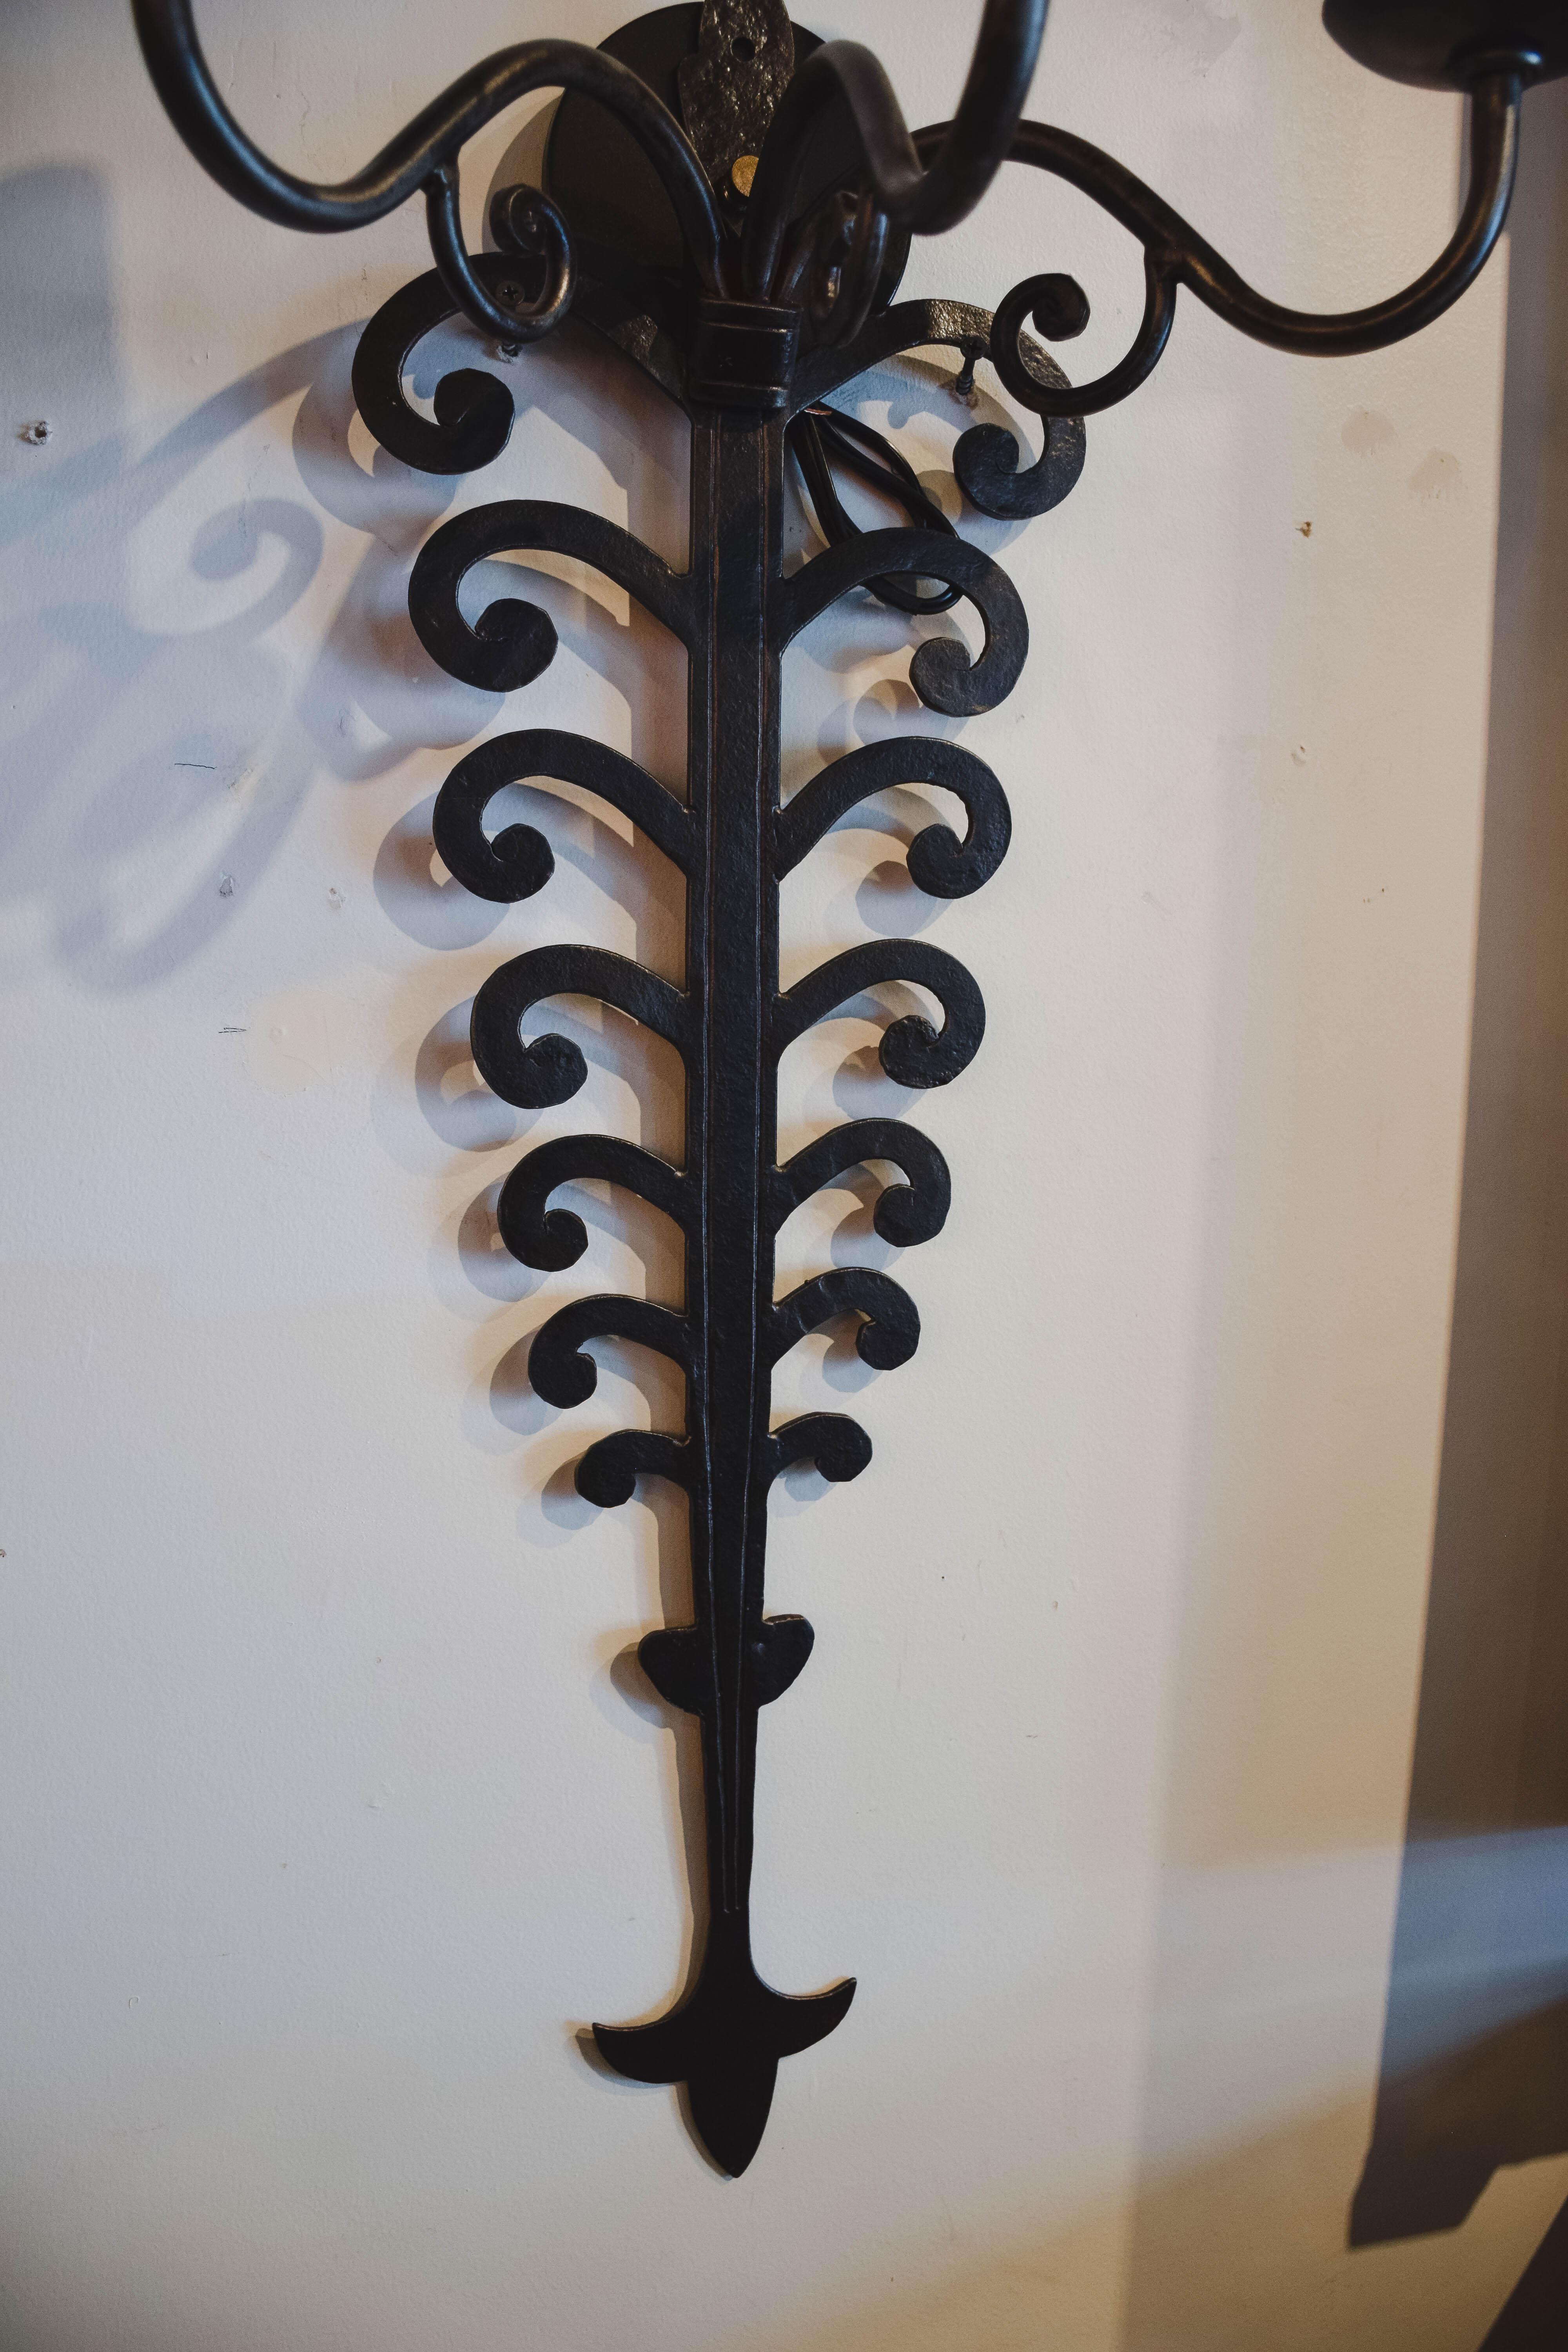 Found in France, these dramatic iron sconces are definite statement pieces. Hand forged in the late 19th century to once hold candles, the sconces have been newly wired to United States standards.